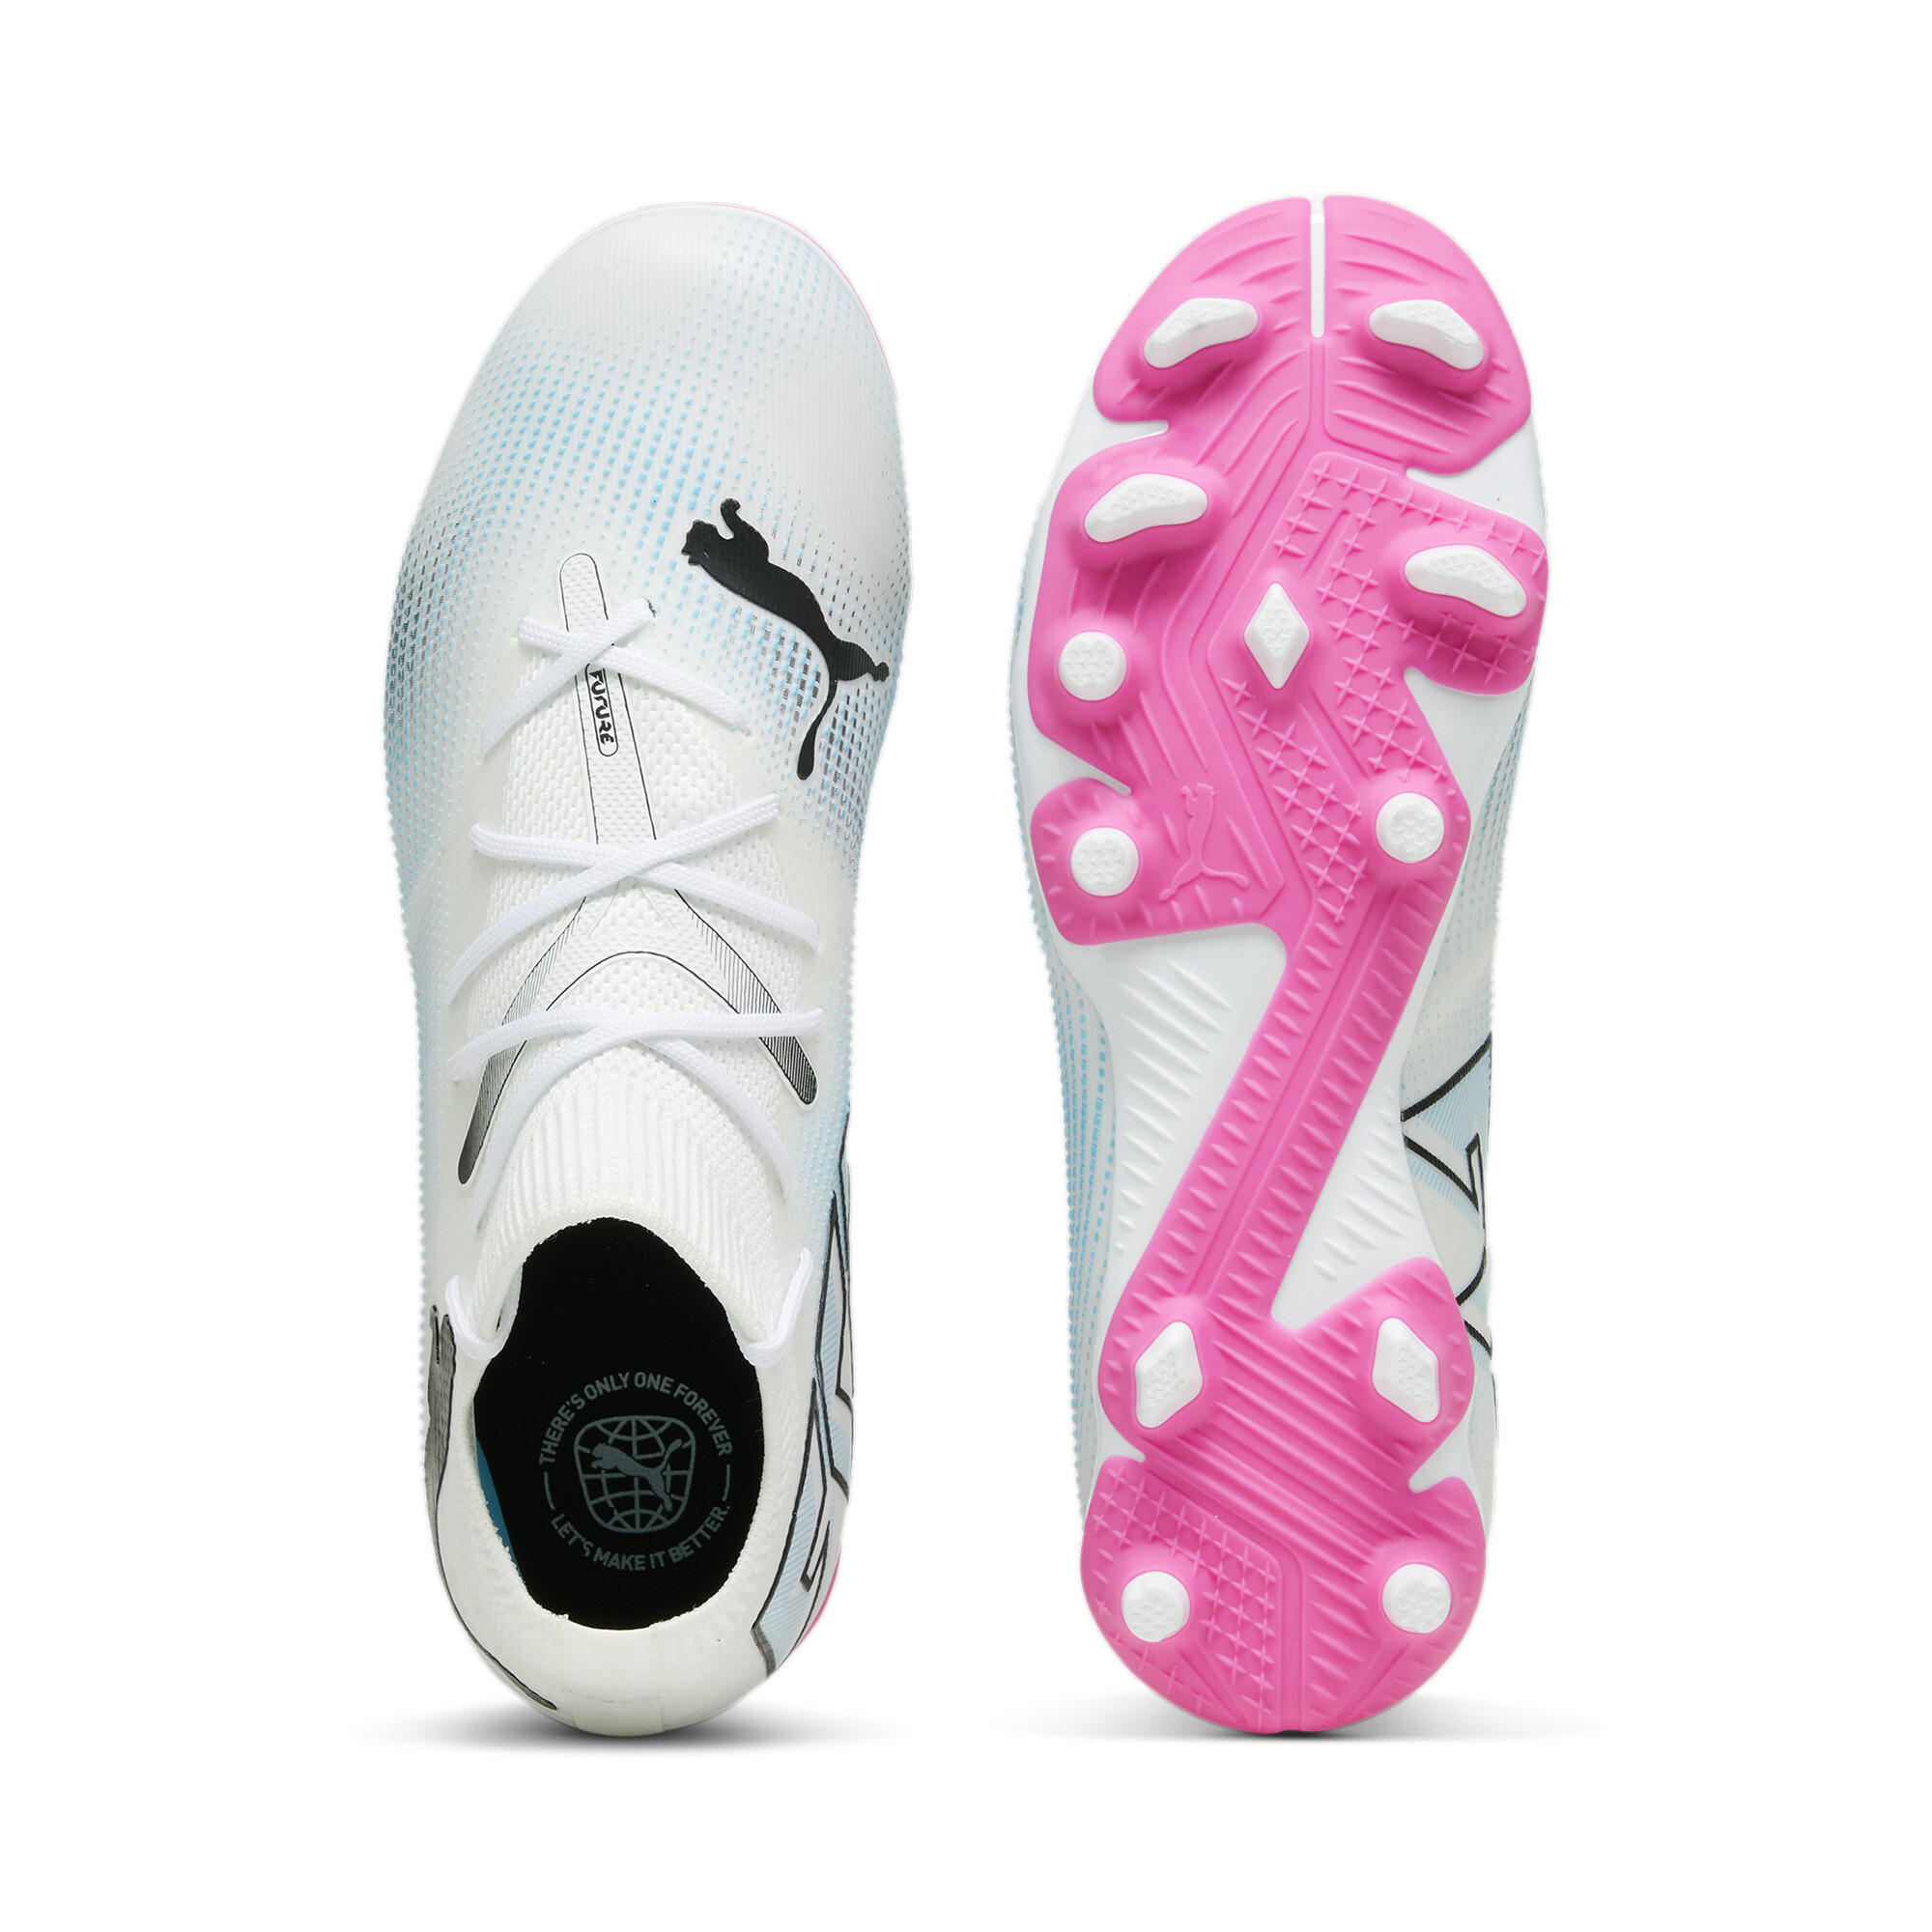 PUMA FUTURE 7 MATCH FG/AG Youth Football Boots In White/Pink, Size EU 37